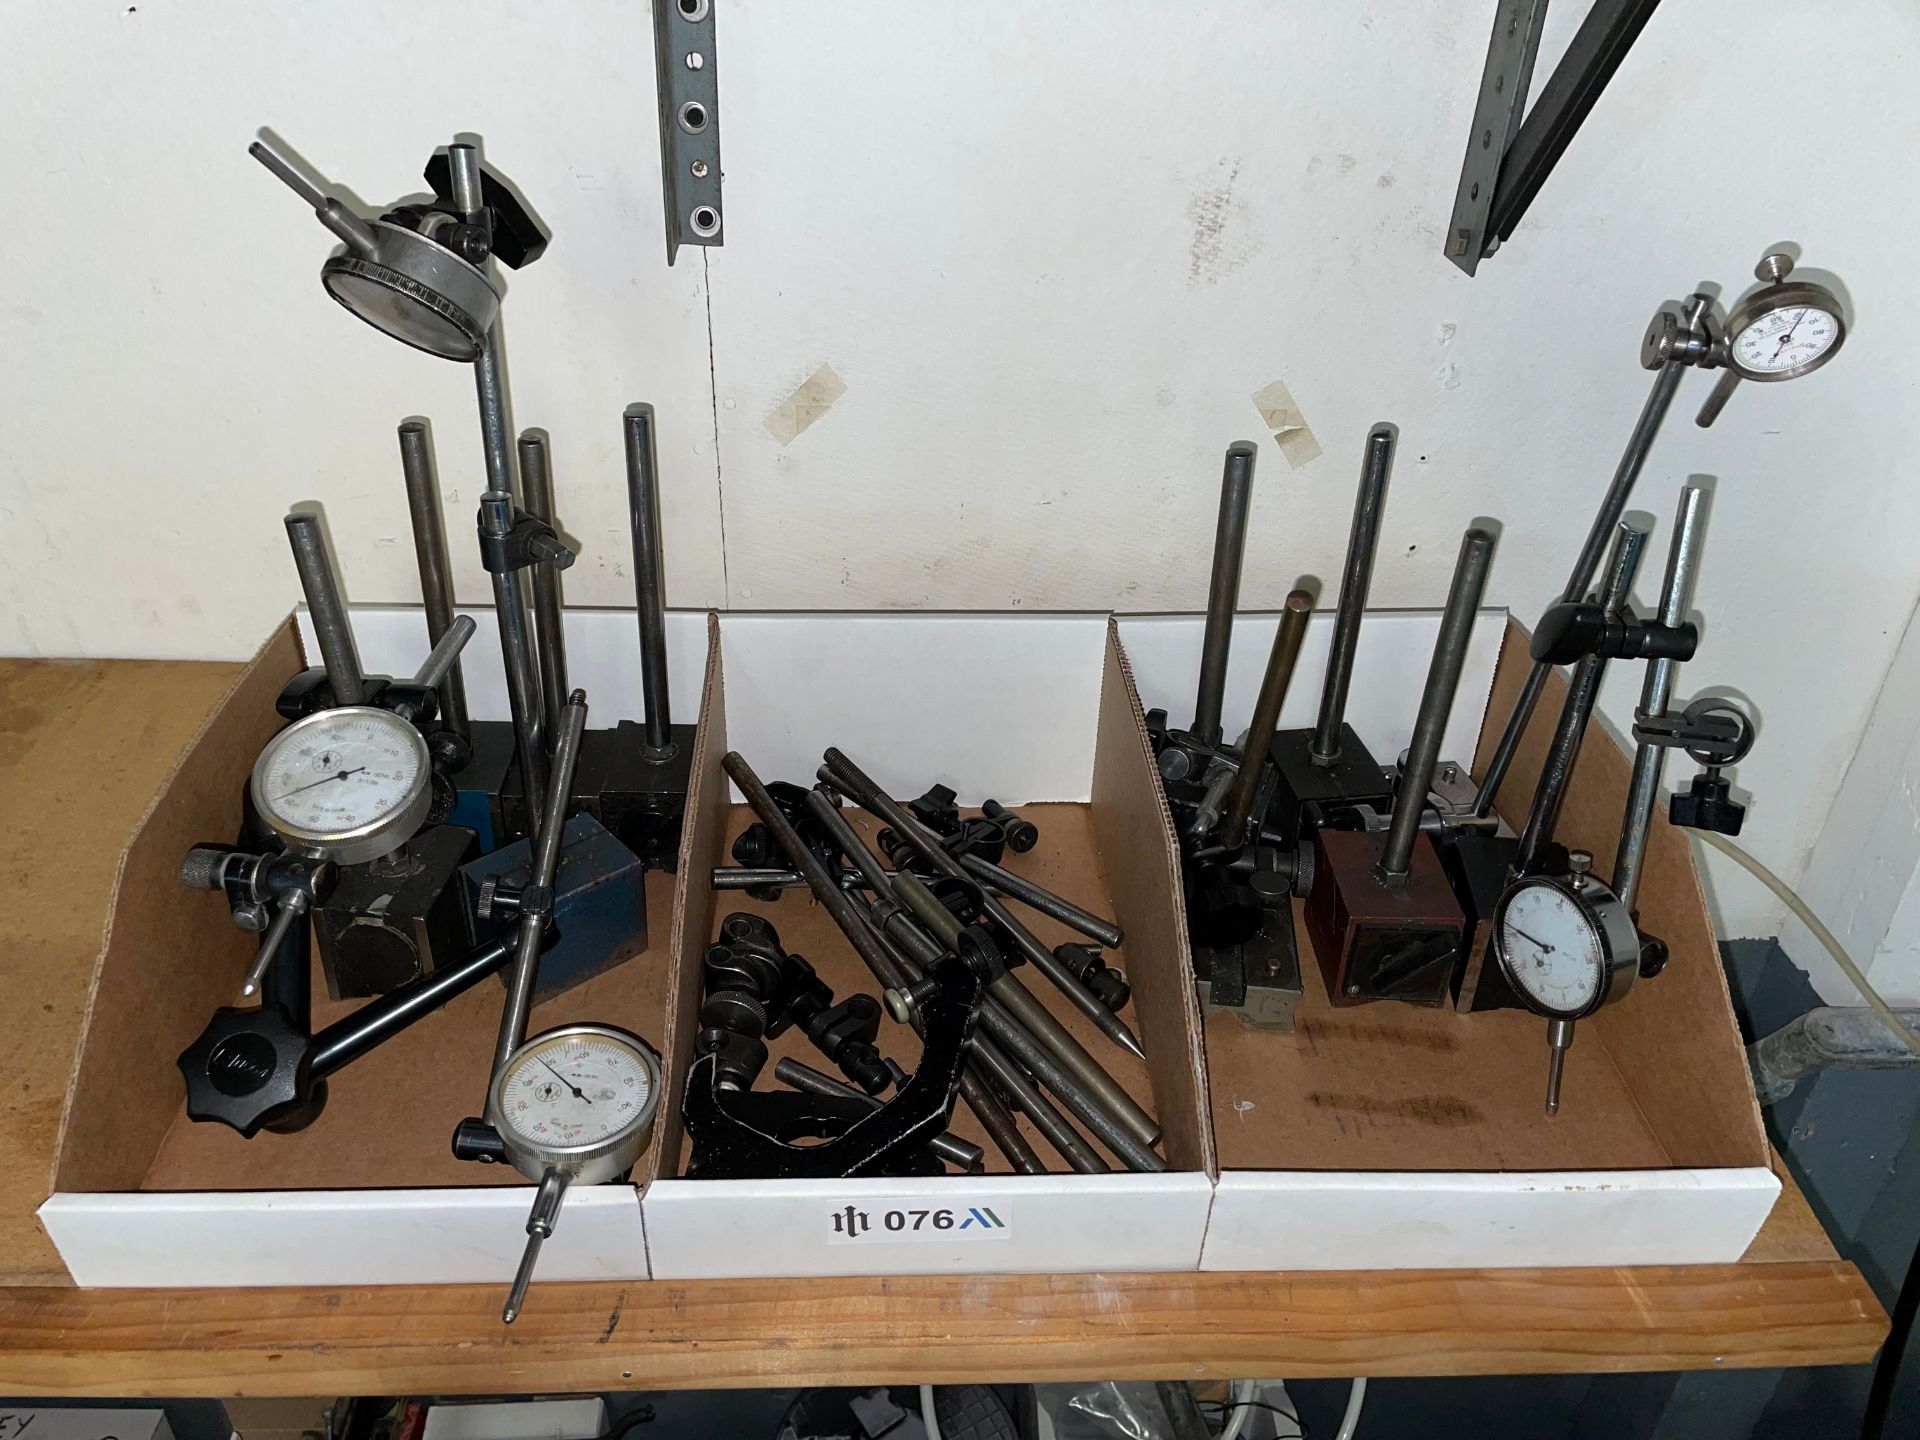 Lot with Various Dial Indicators and Gage Stands - Image 3 of 3